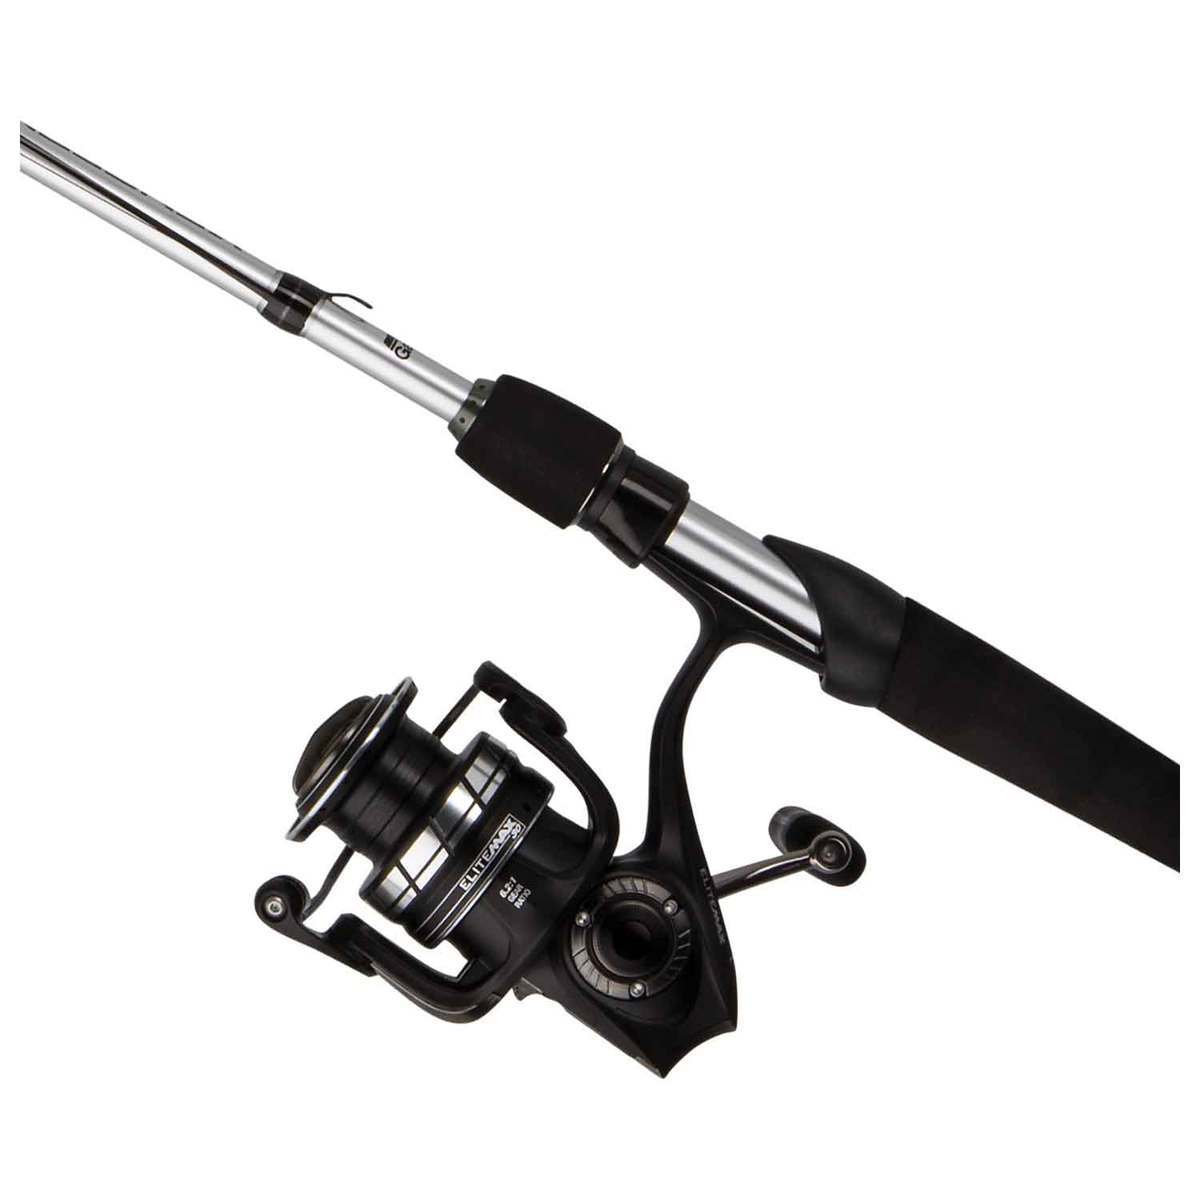 abu-garcia-elite-max-spinning-rod-and-reel-combo-6ft-6in-medium